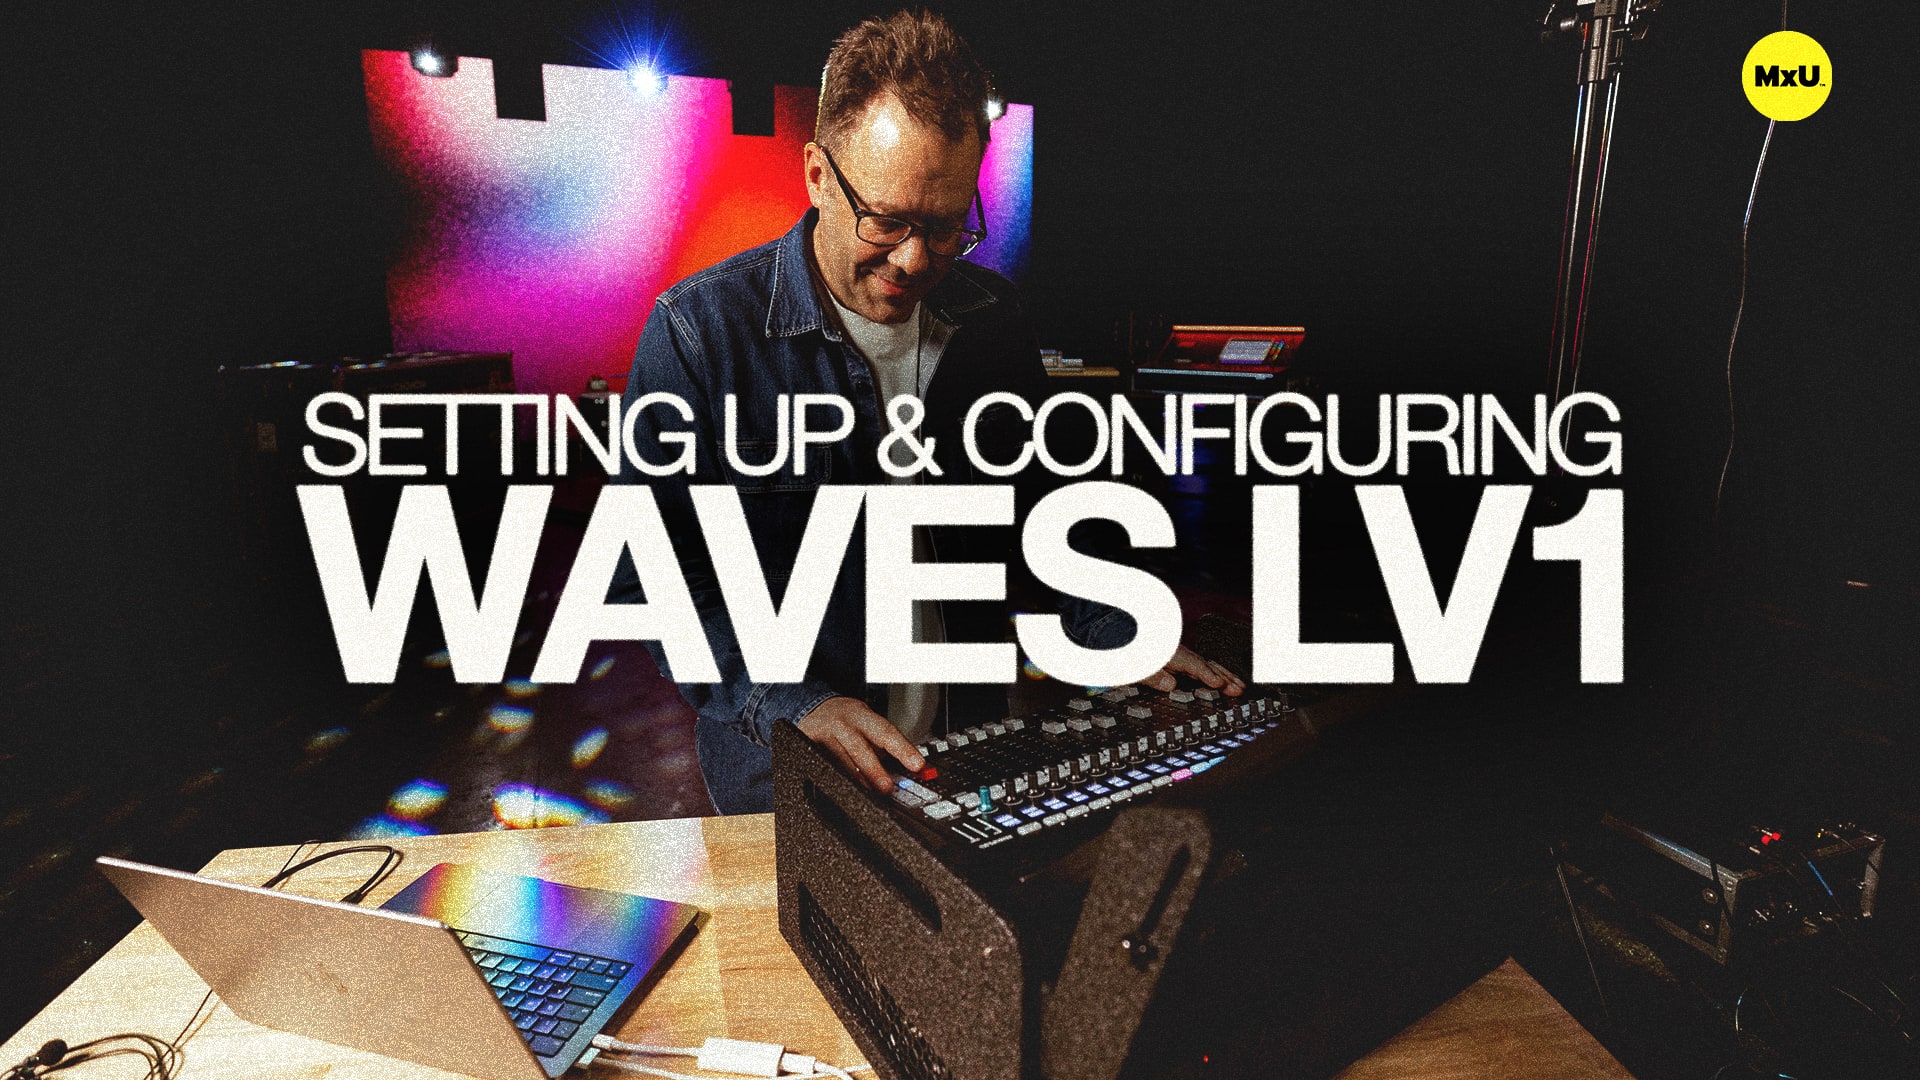 Setting Up & Configuring Waves LV1 Course Trailer